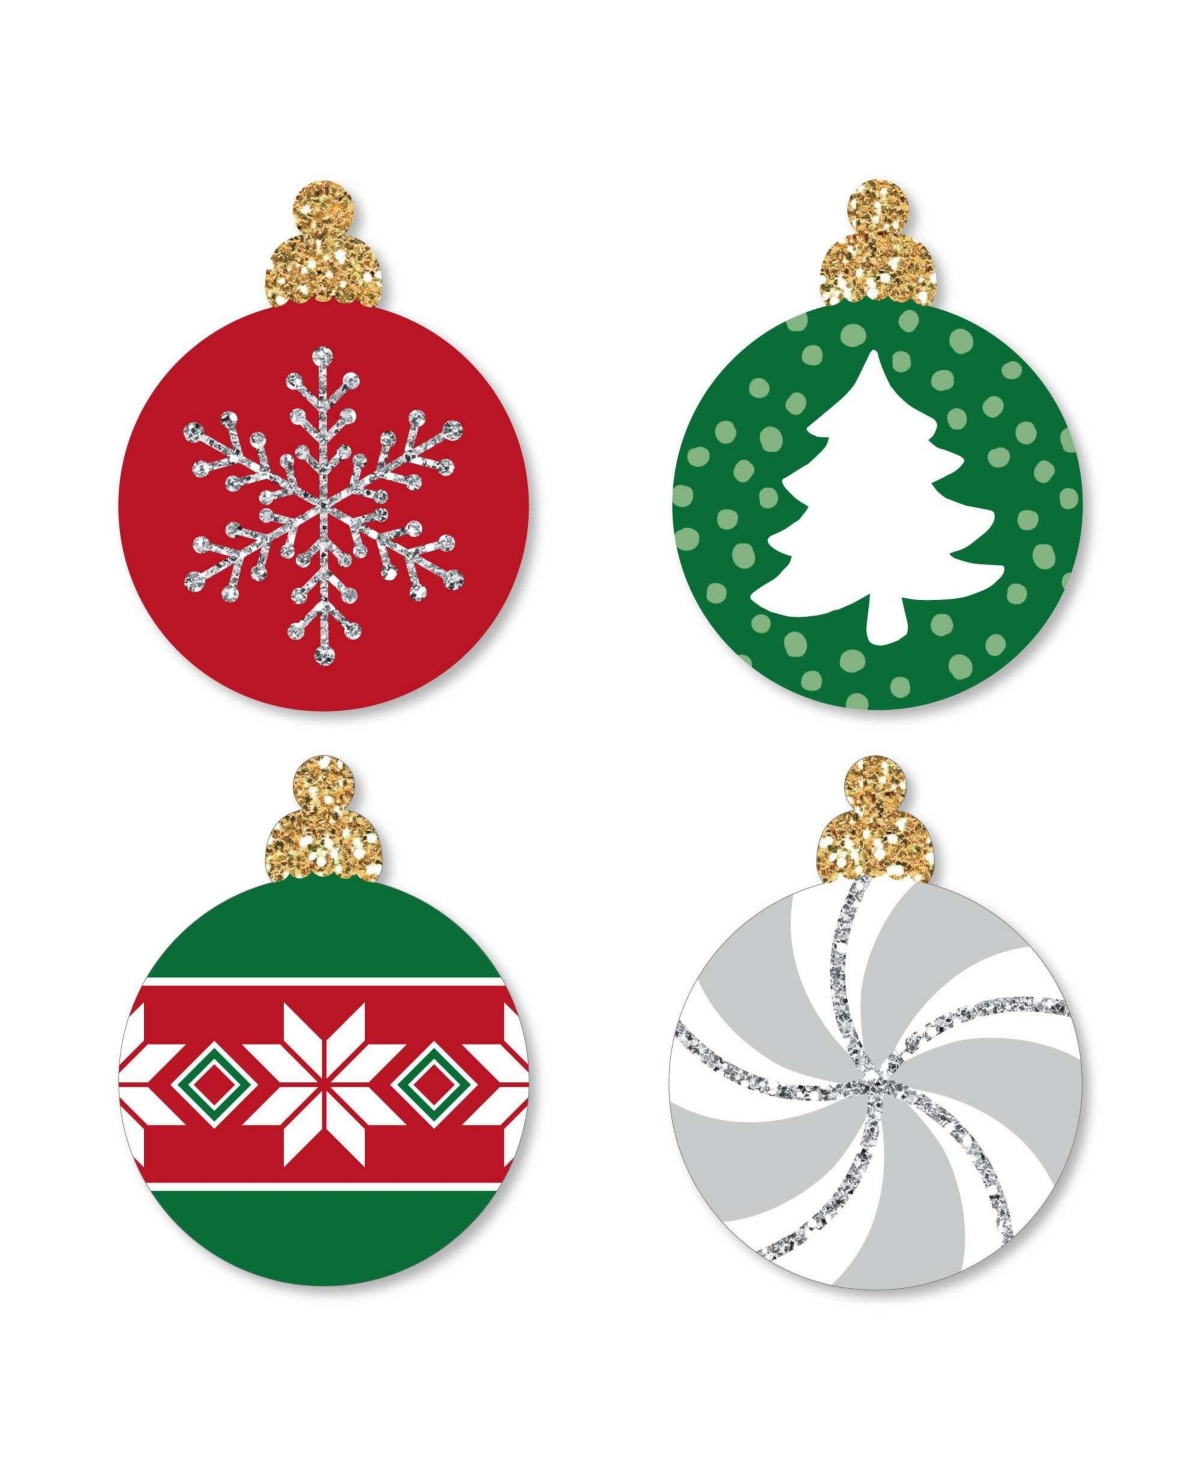 Ornaments - Diy Shaped Holiday and Christmas Party Cut-Outs - 24 Ct